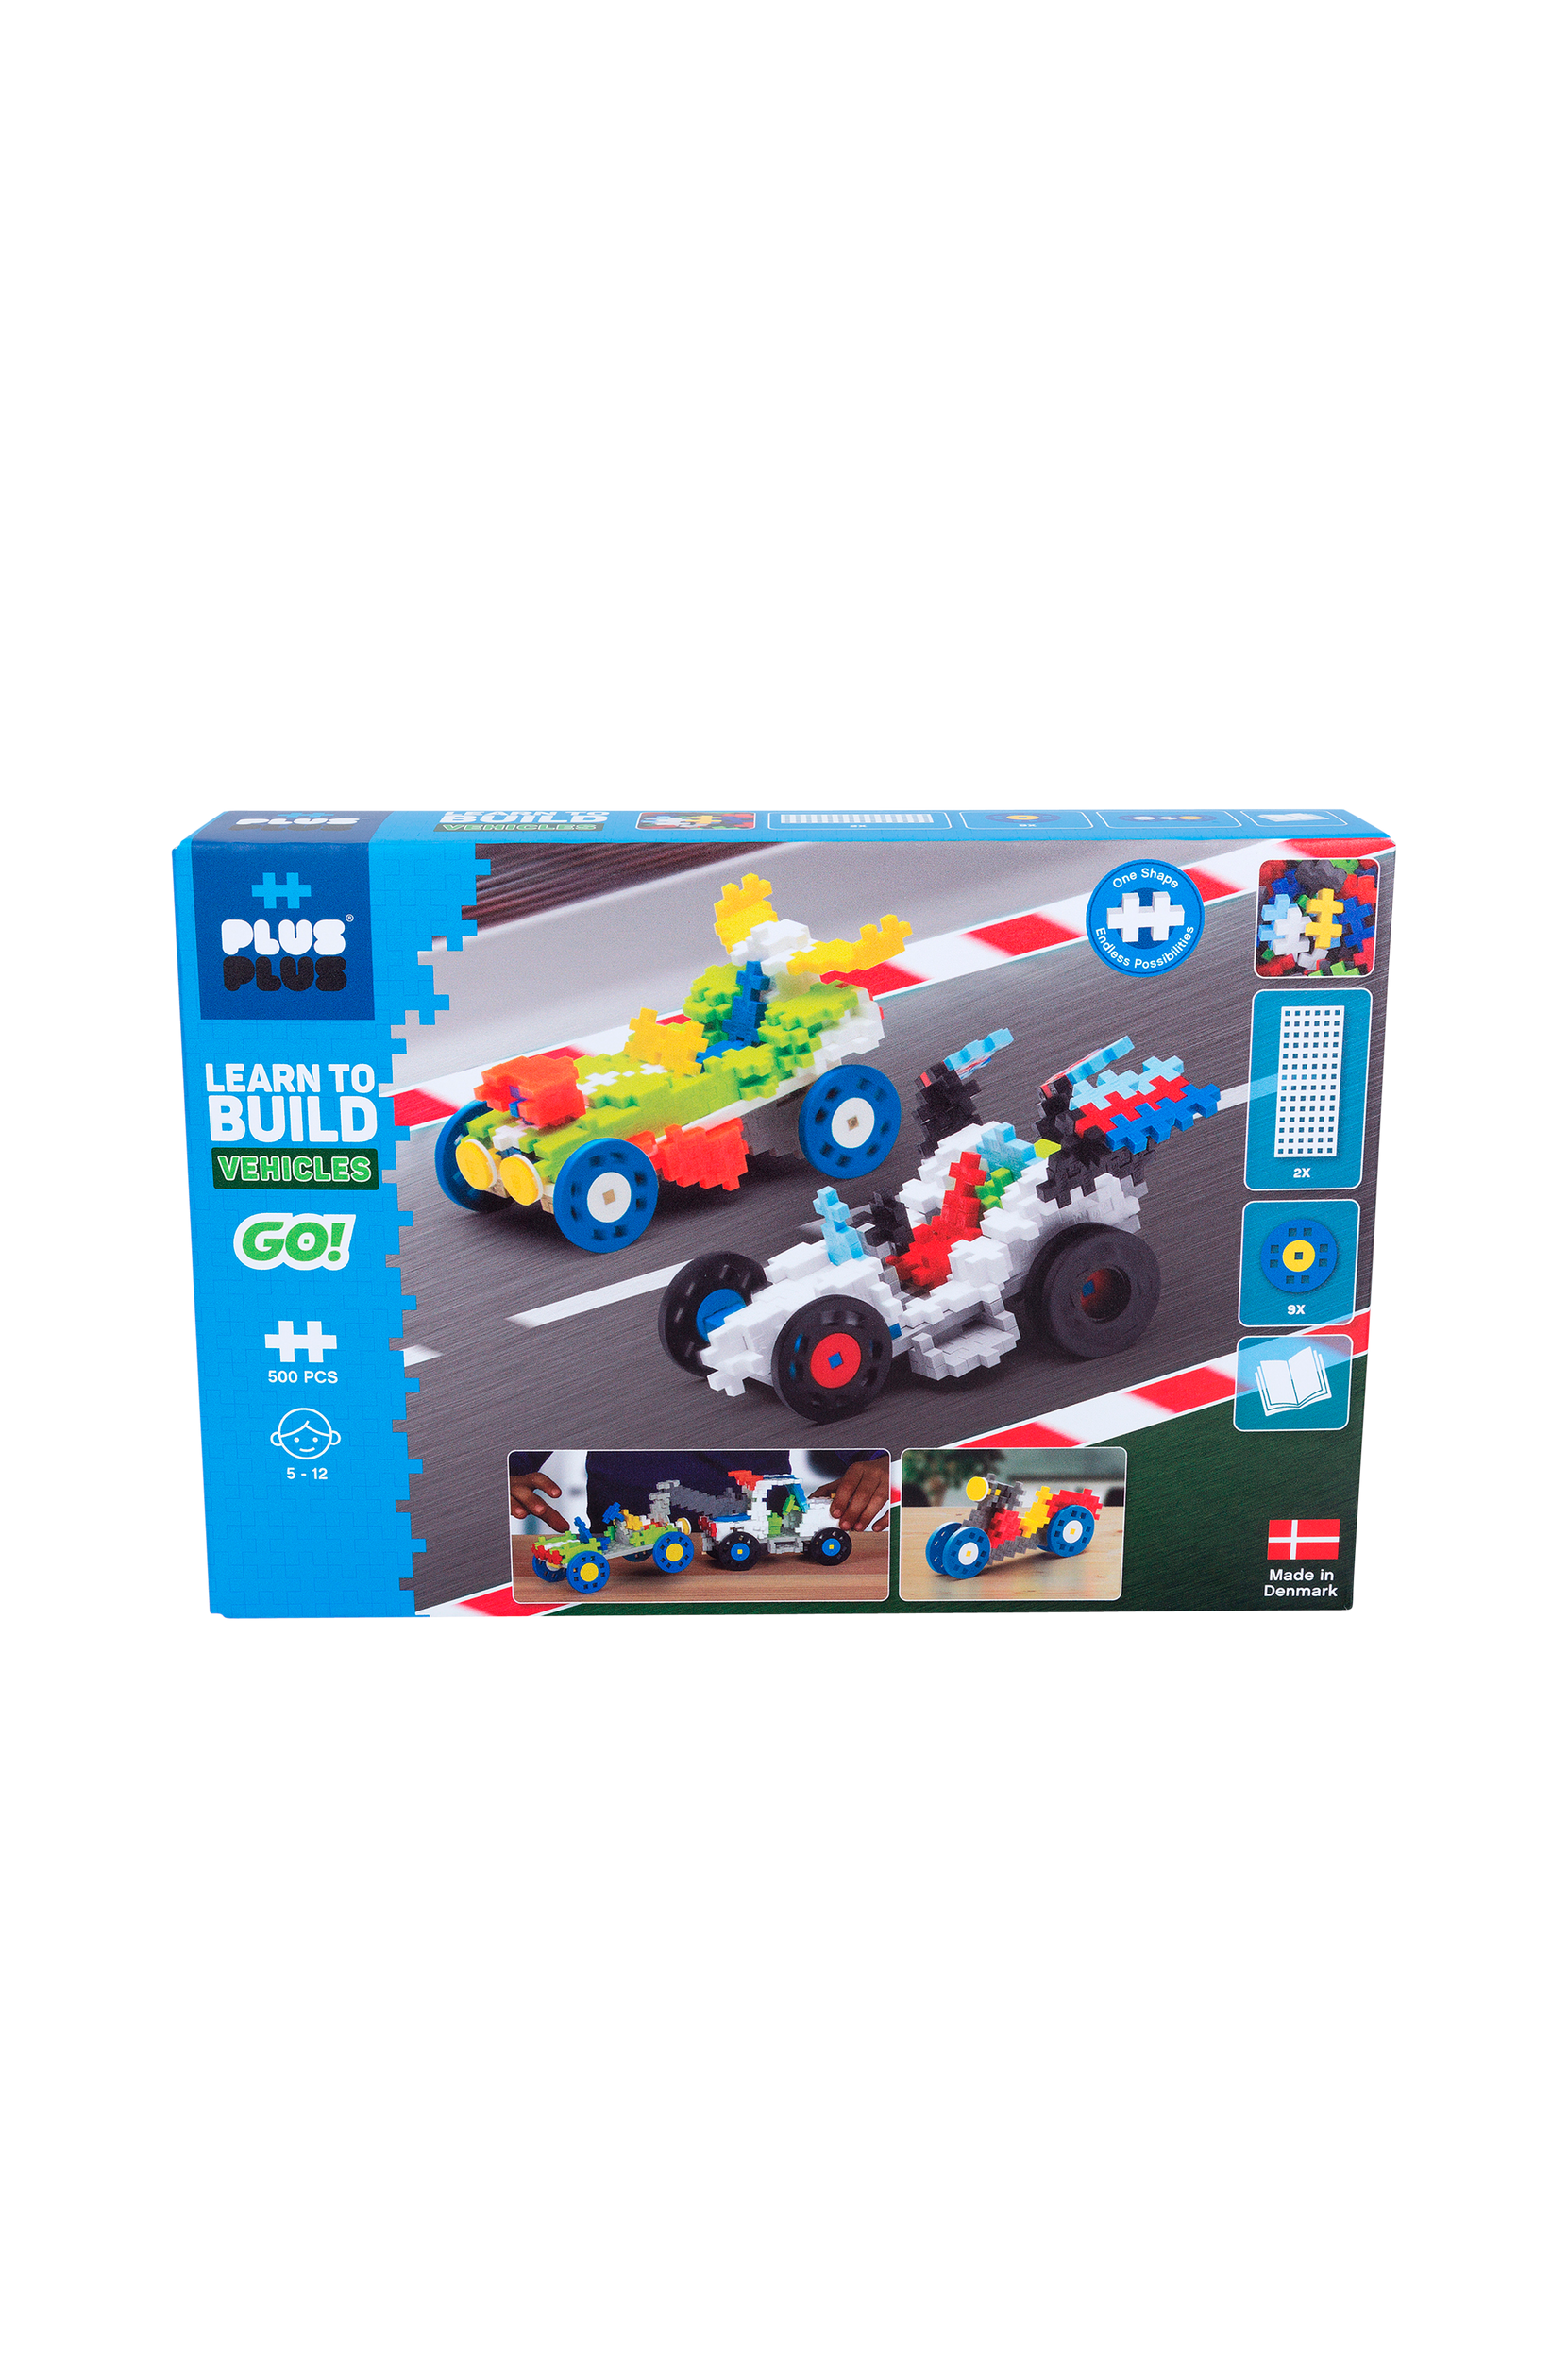 Plus Plus - Learn to build vehicles